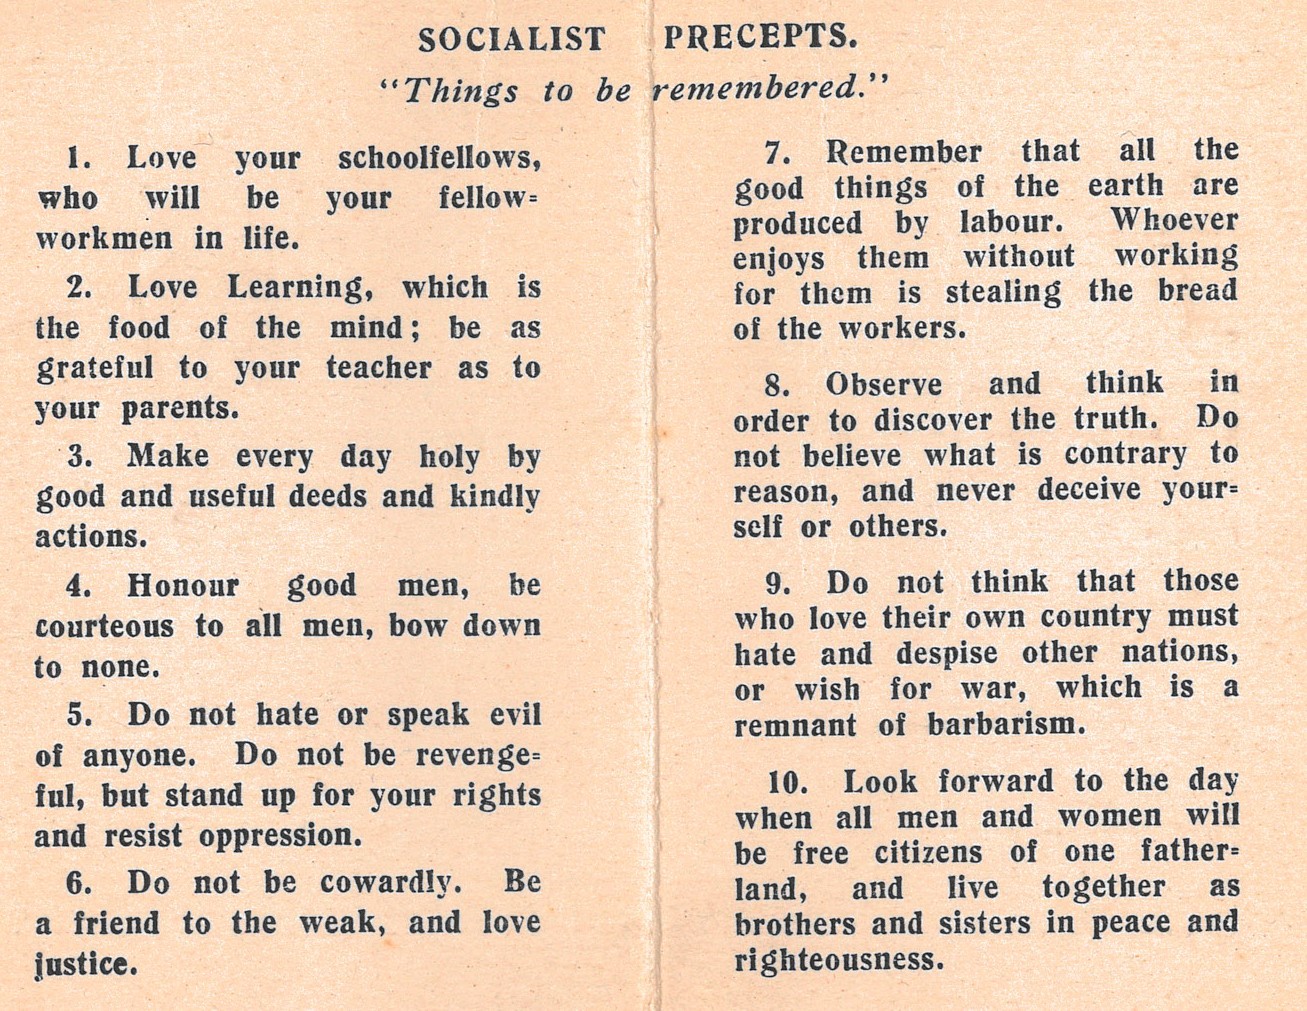 Socialist Sunday School Song Book, 1957. Pic: Glasgow City Archives